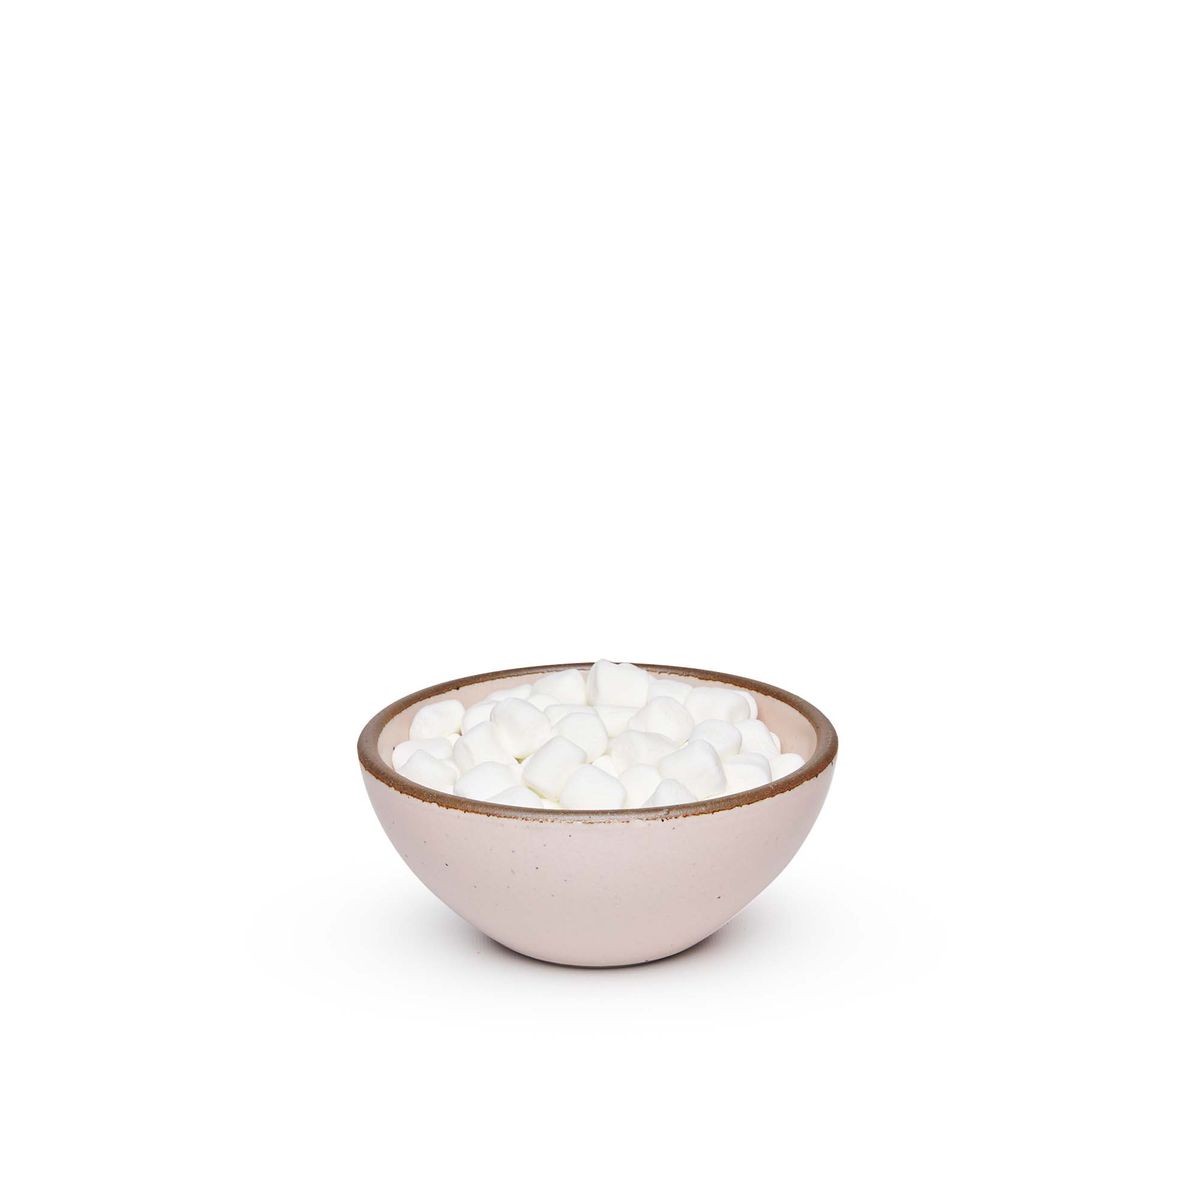 A small dessert sized rounded ceramic bowl in a soft light pink color featuring iron speckles and an unglazed rim, filled with marshmallows